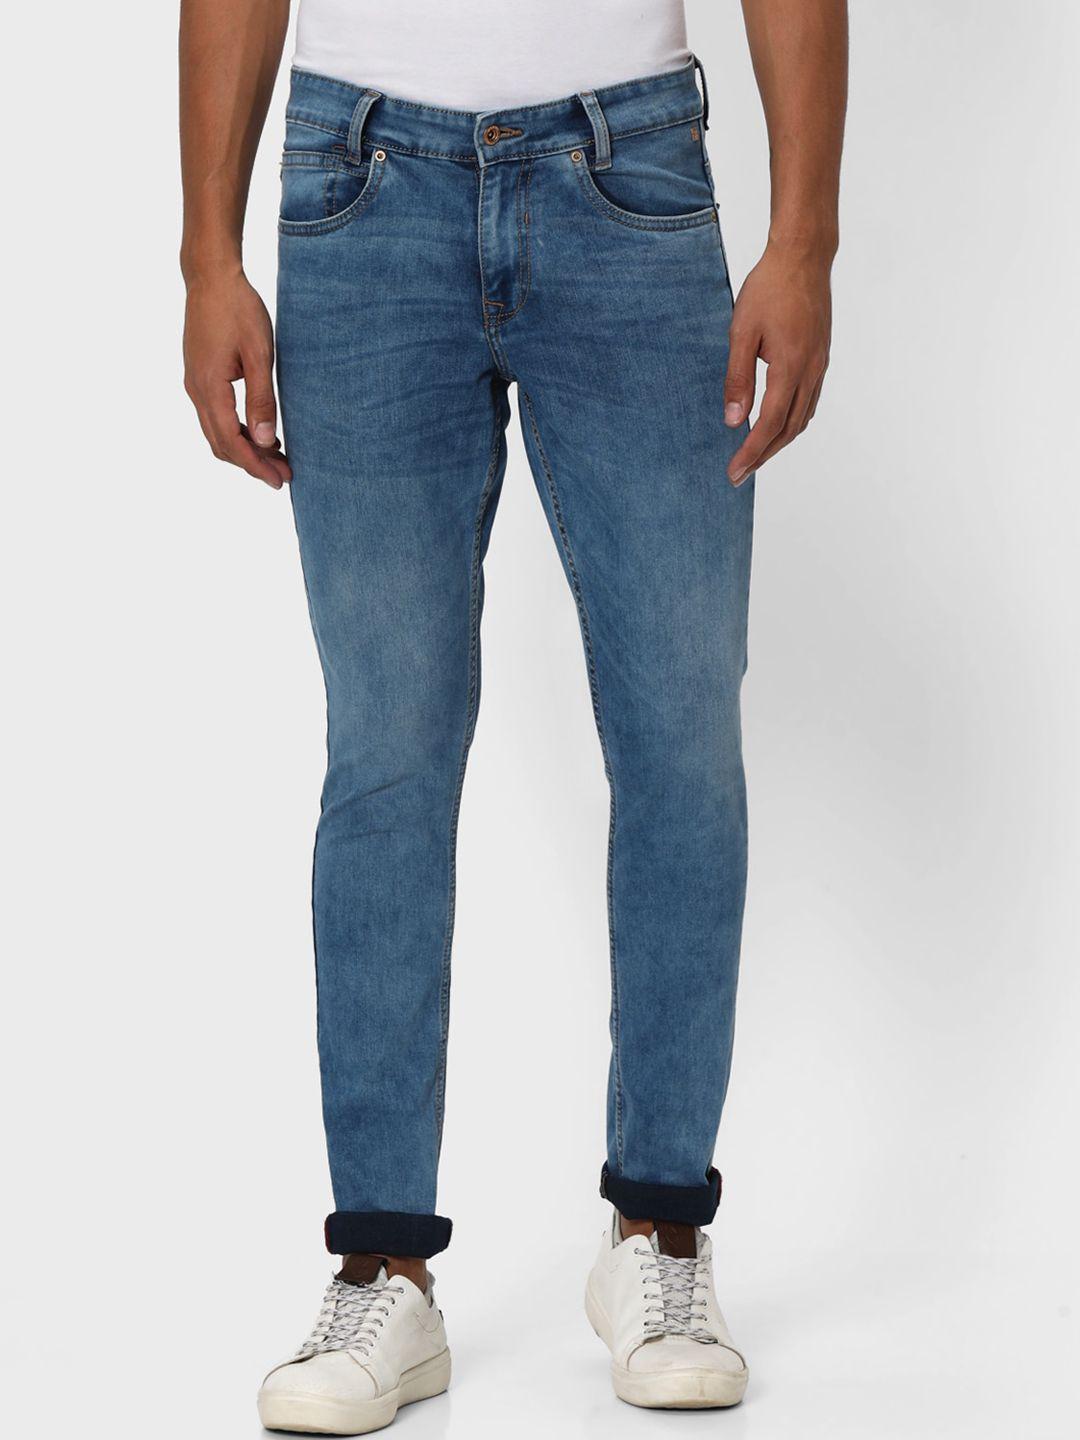 mufti-men-skinny-fit-mid-rise-heavy-fade-stretchable-jeans